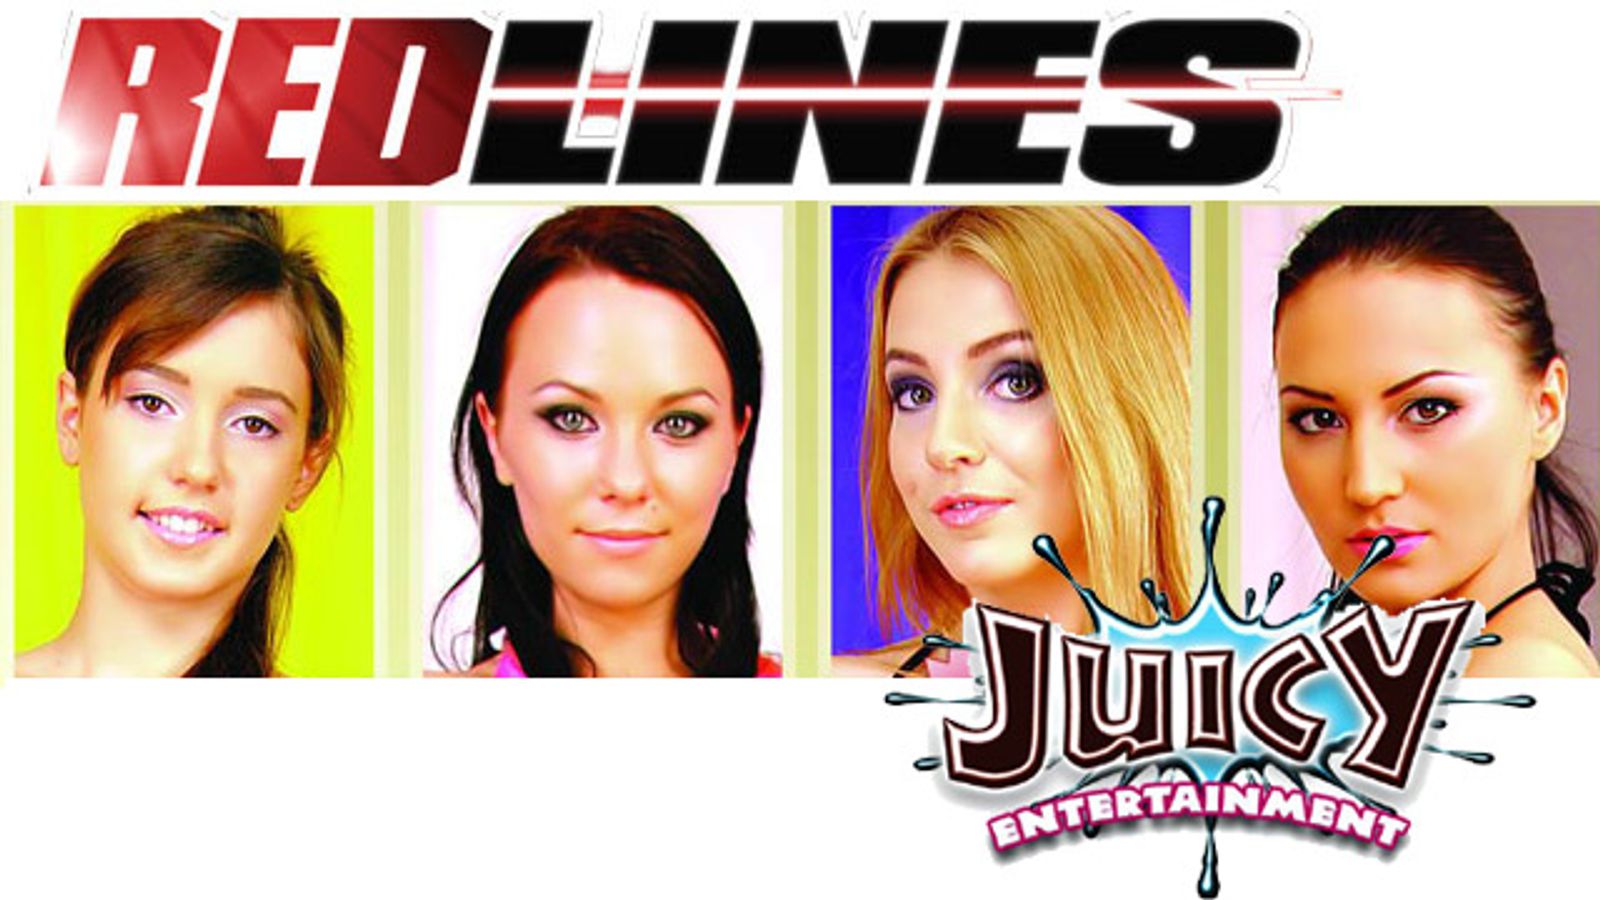 Juicy Entertainment to Distribute Russia’s Red Lines Video